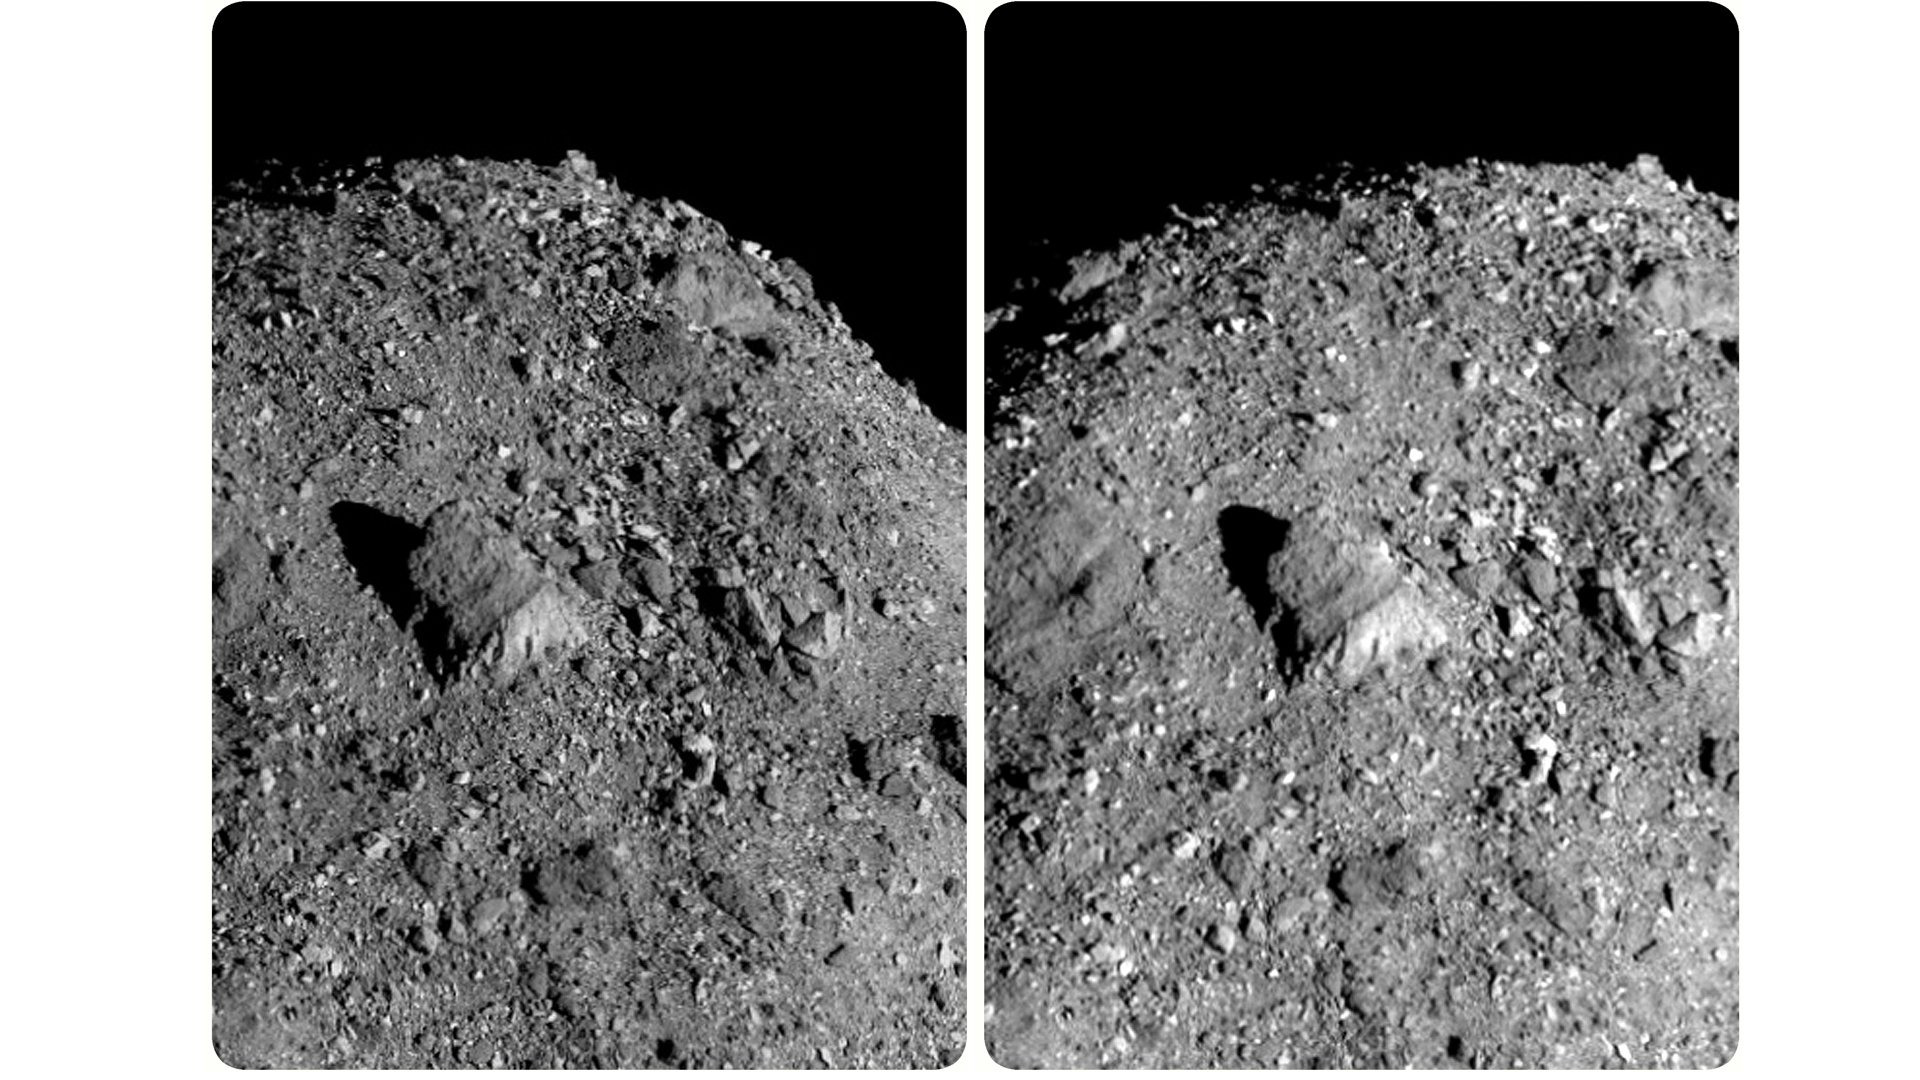 A stereoscopic image of a rocky outcrop on the surface of asteroid Bennu.